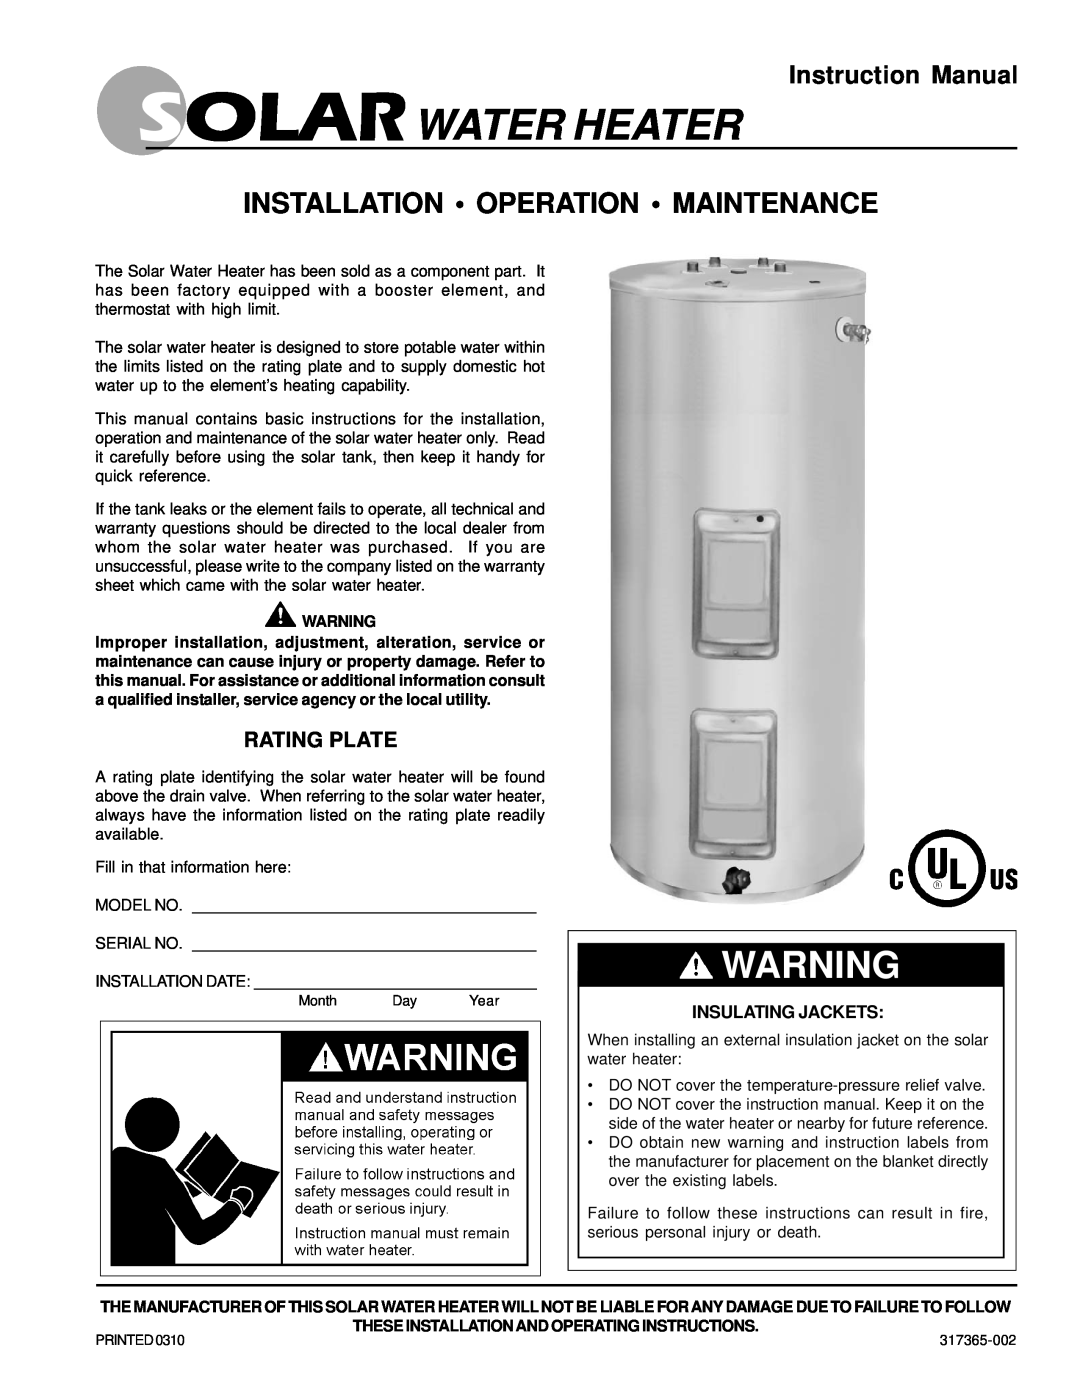 American Water Heater 317365-002 instruction manual Instruction Manual, Rating Plate, Solarwater Heater 